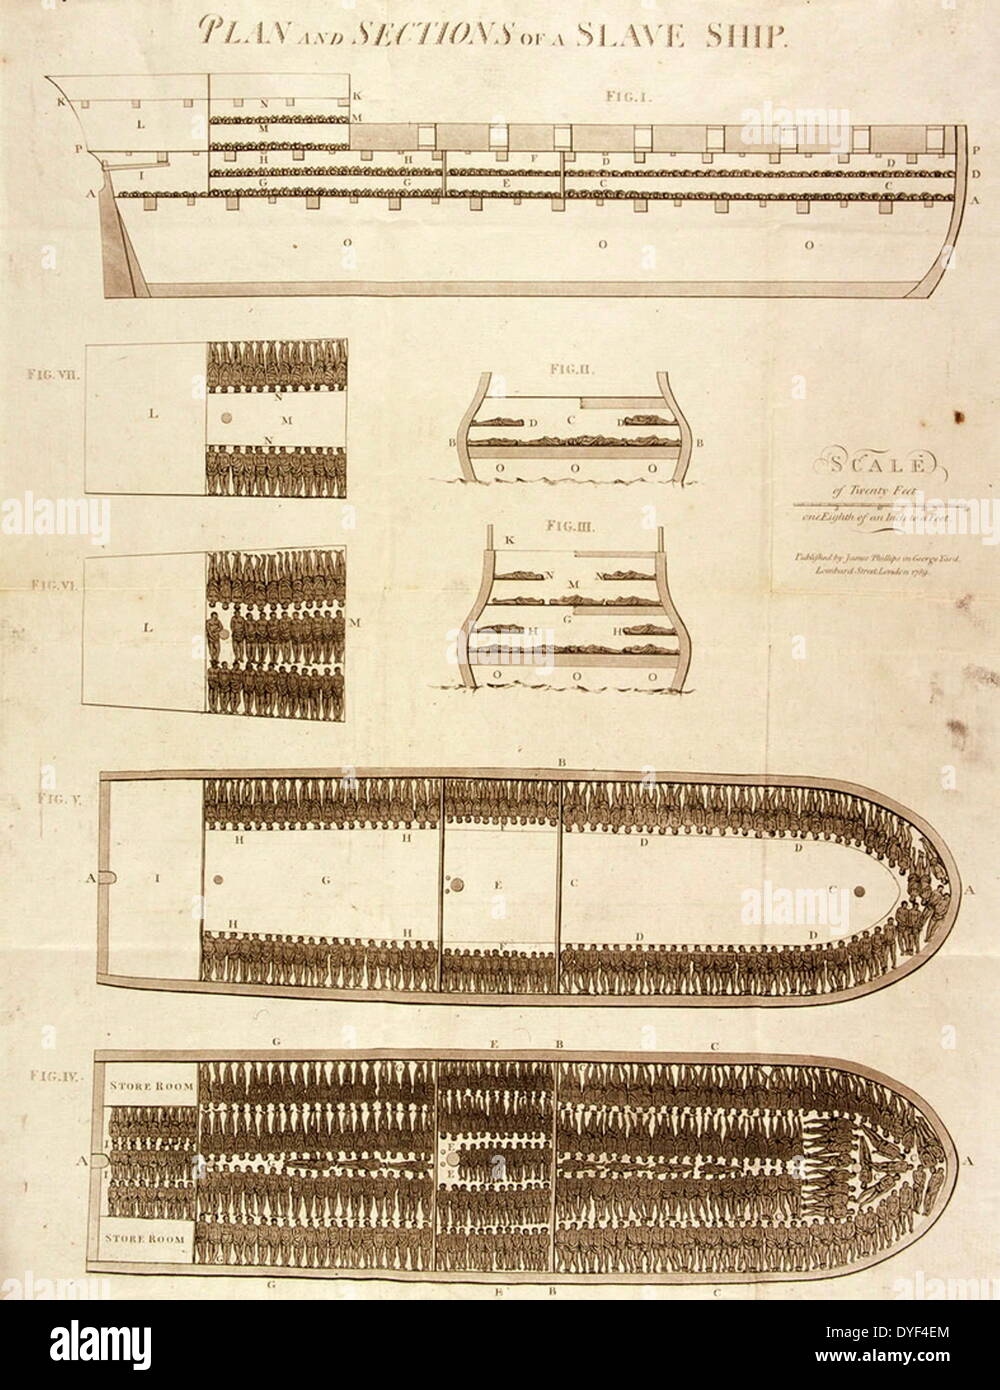 Plan and Sections of a Slave Ship. Unknown Stock Photo